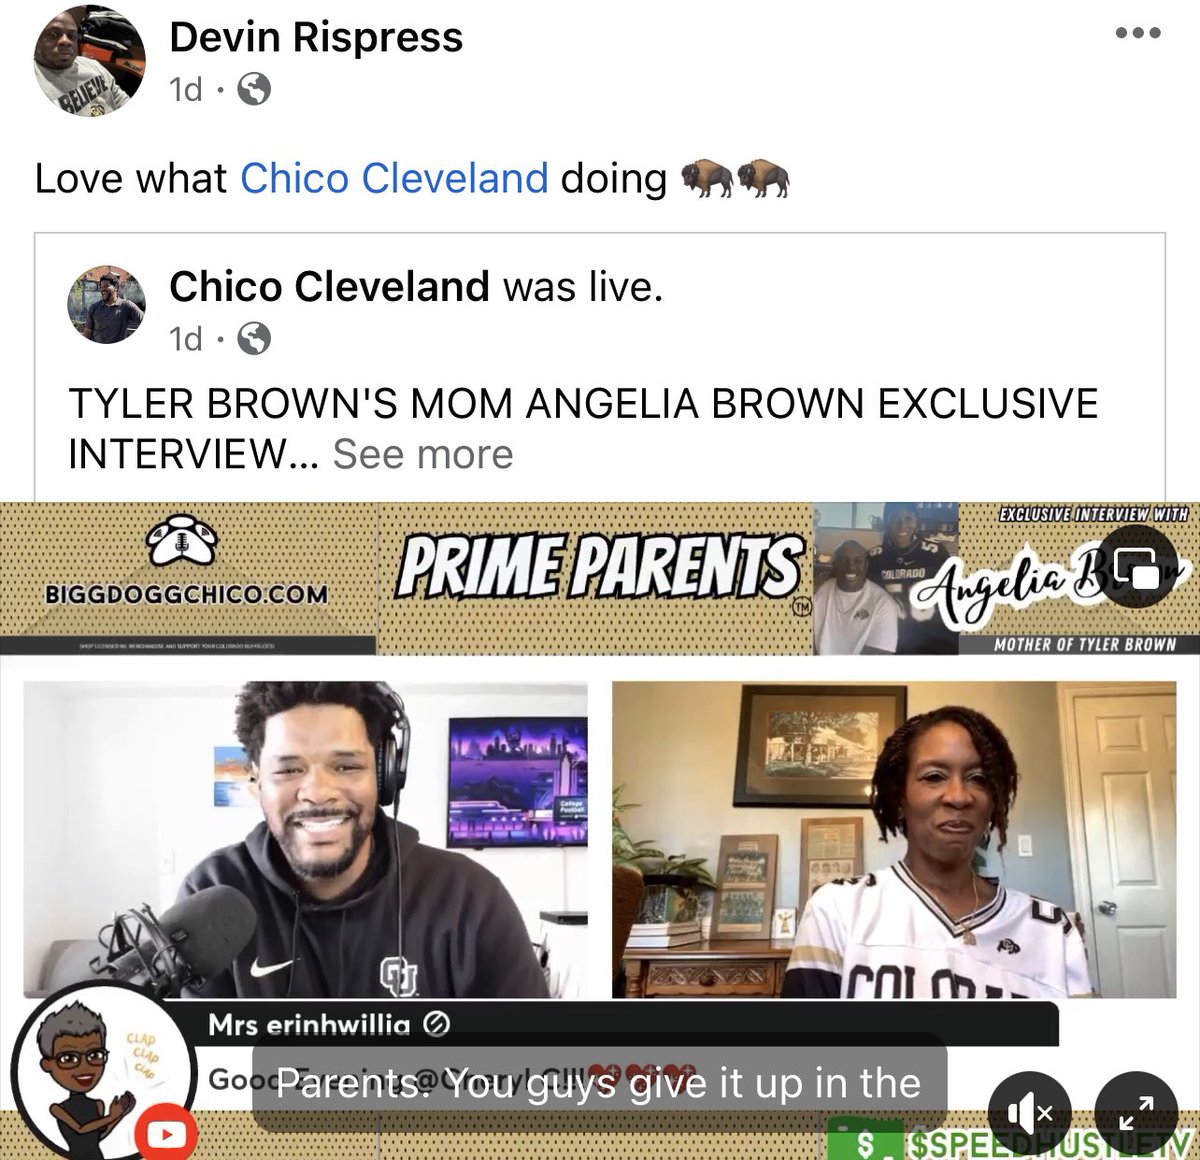 @Coach2Bless on @ChicoCleveland #PrimeParents 🏈 TYLER BROWN'S MOM ANGELIA BROWN EXCLUSIVE INTERVIEW #PRIMEPARENTS #CAOCHPRIME #TYLERBROWN @t_brown56 Join this channel as an Official Member: youtube.com/channel/UCw_ea… #SkoBuffs #BuffNation